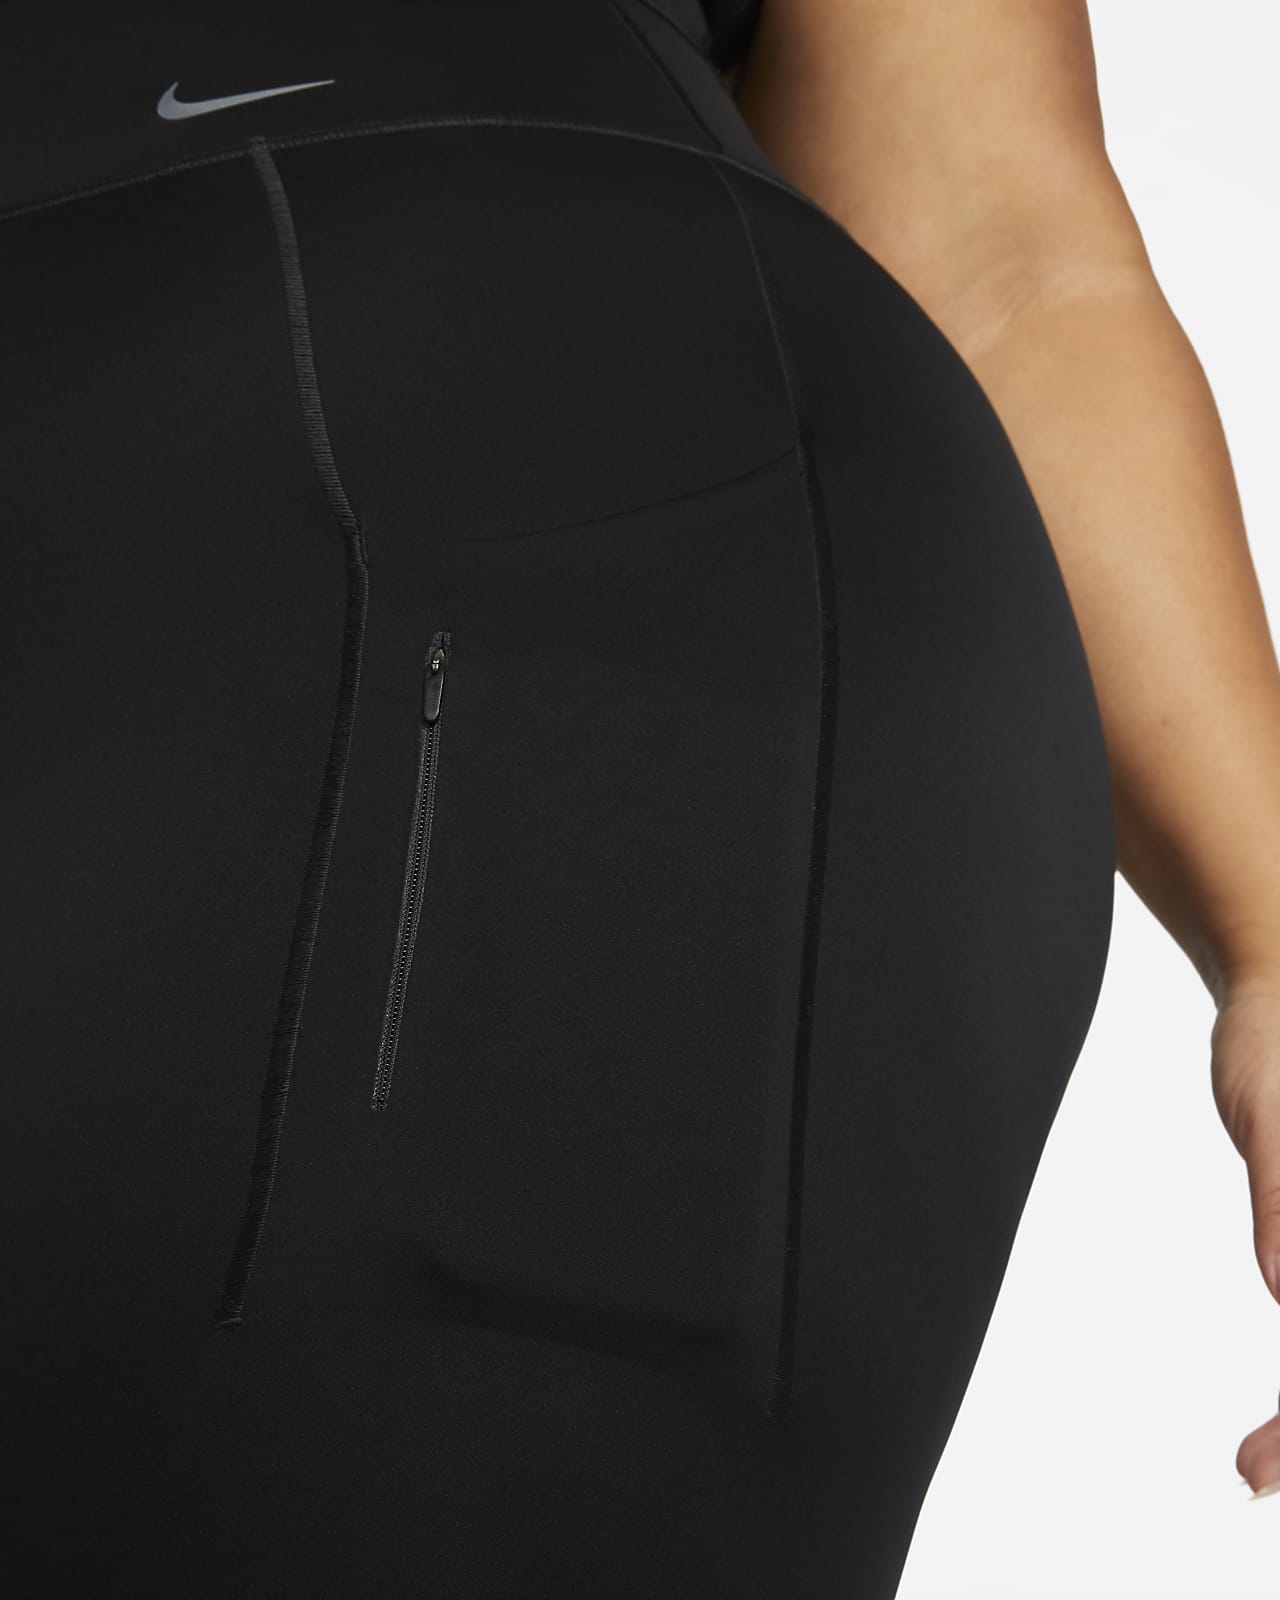 Go Women's Firm-Support High-Waisted Full-Length Leggings with Pockets (Plus Size). Nike SA